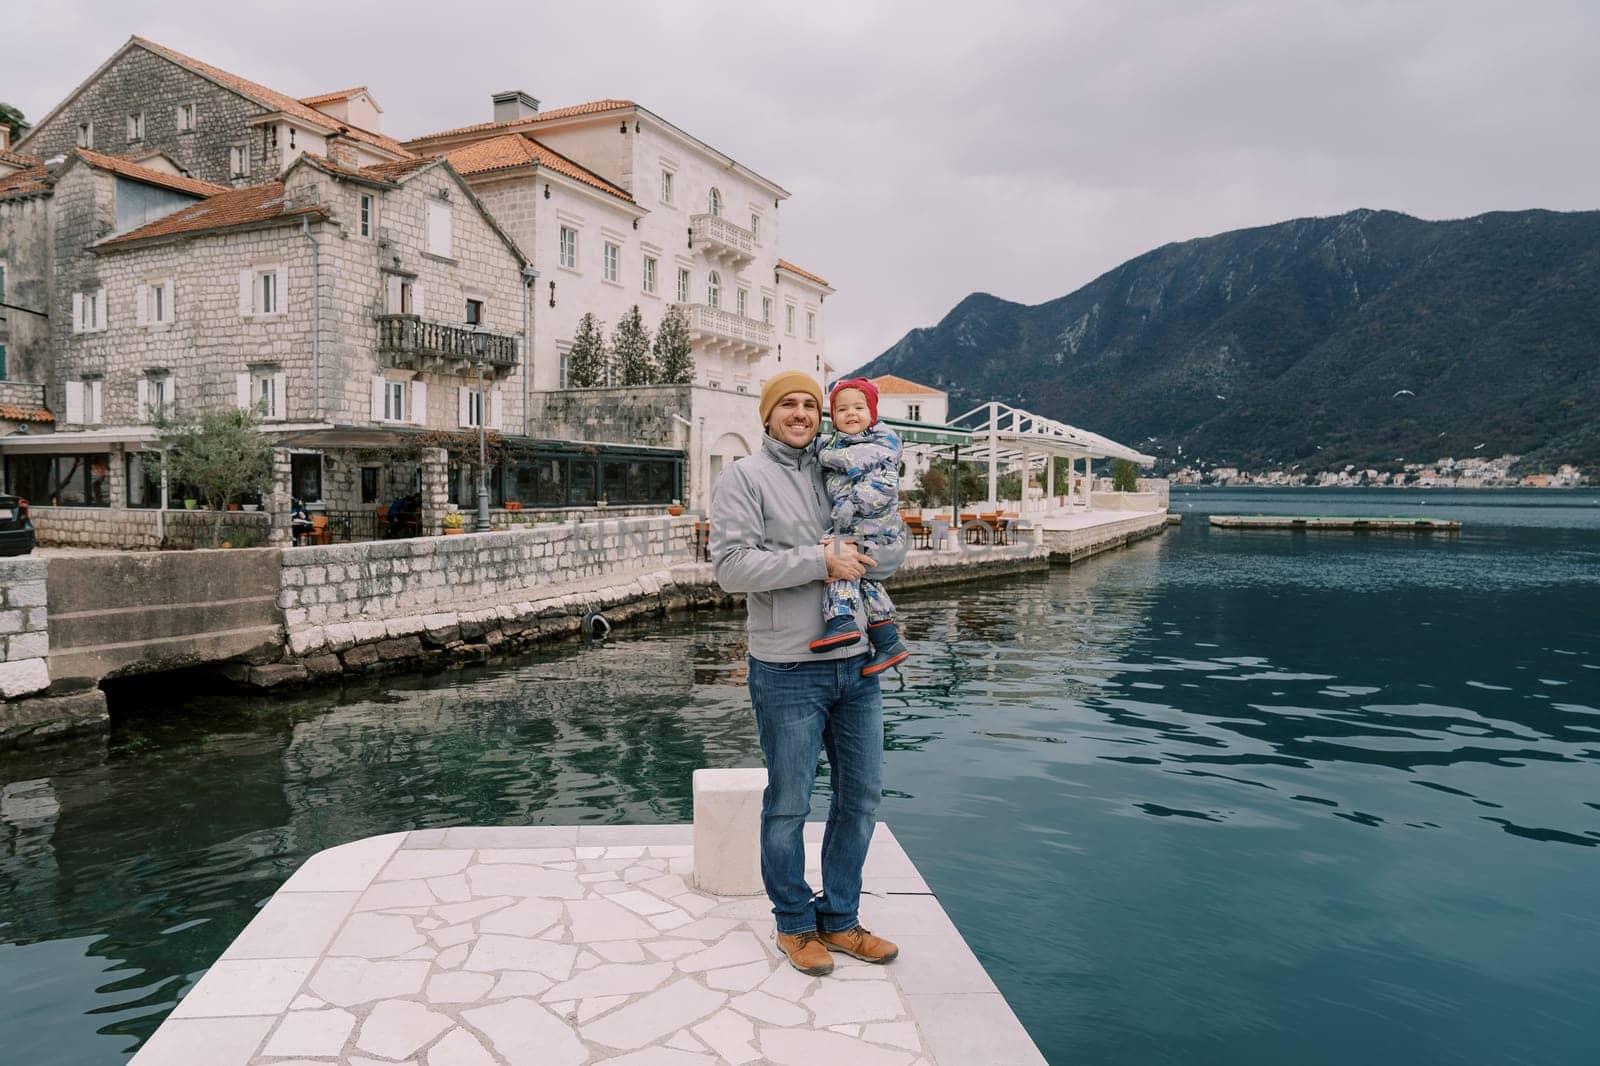 Dad with a little girl in his arms stands on the pier of the town of Perast. Montenegro by Nadtochiy